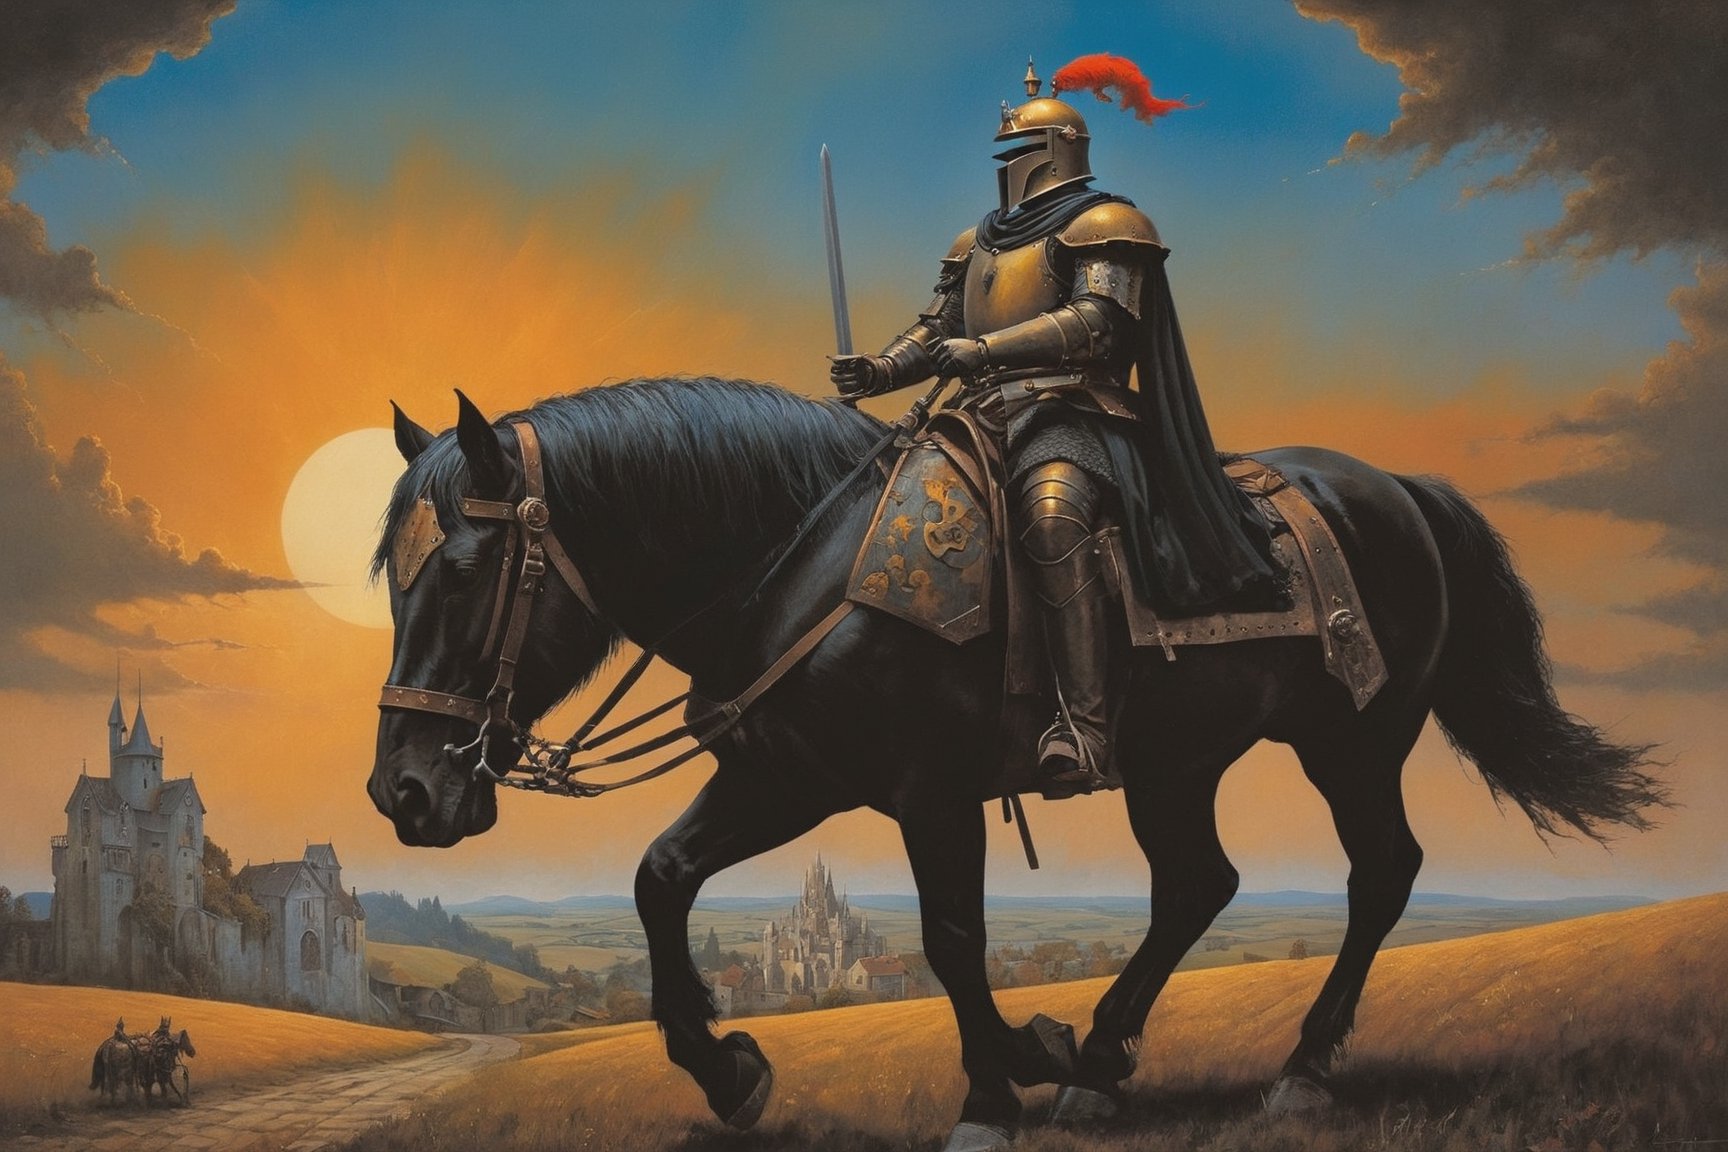 (Beksinski style:1.5), abstract, (battle scene:1.6), (steam punk:1.5), (surrealism:1.6), Medieval mythology: legendary in medieval lore, the enigmatic Black Knight embodies mystery, formidable prowess, and a guardian's unwavering commitment in timeless tales.,DonMM4g1cXL ,aw0k euphoric style, in the style of esao andrews,esao andrews style